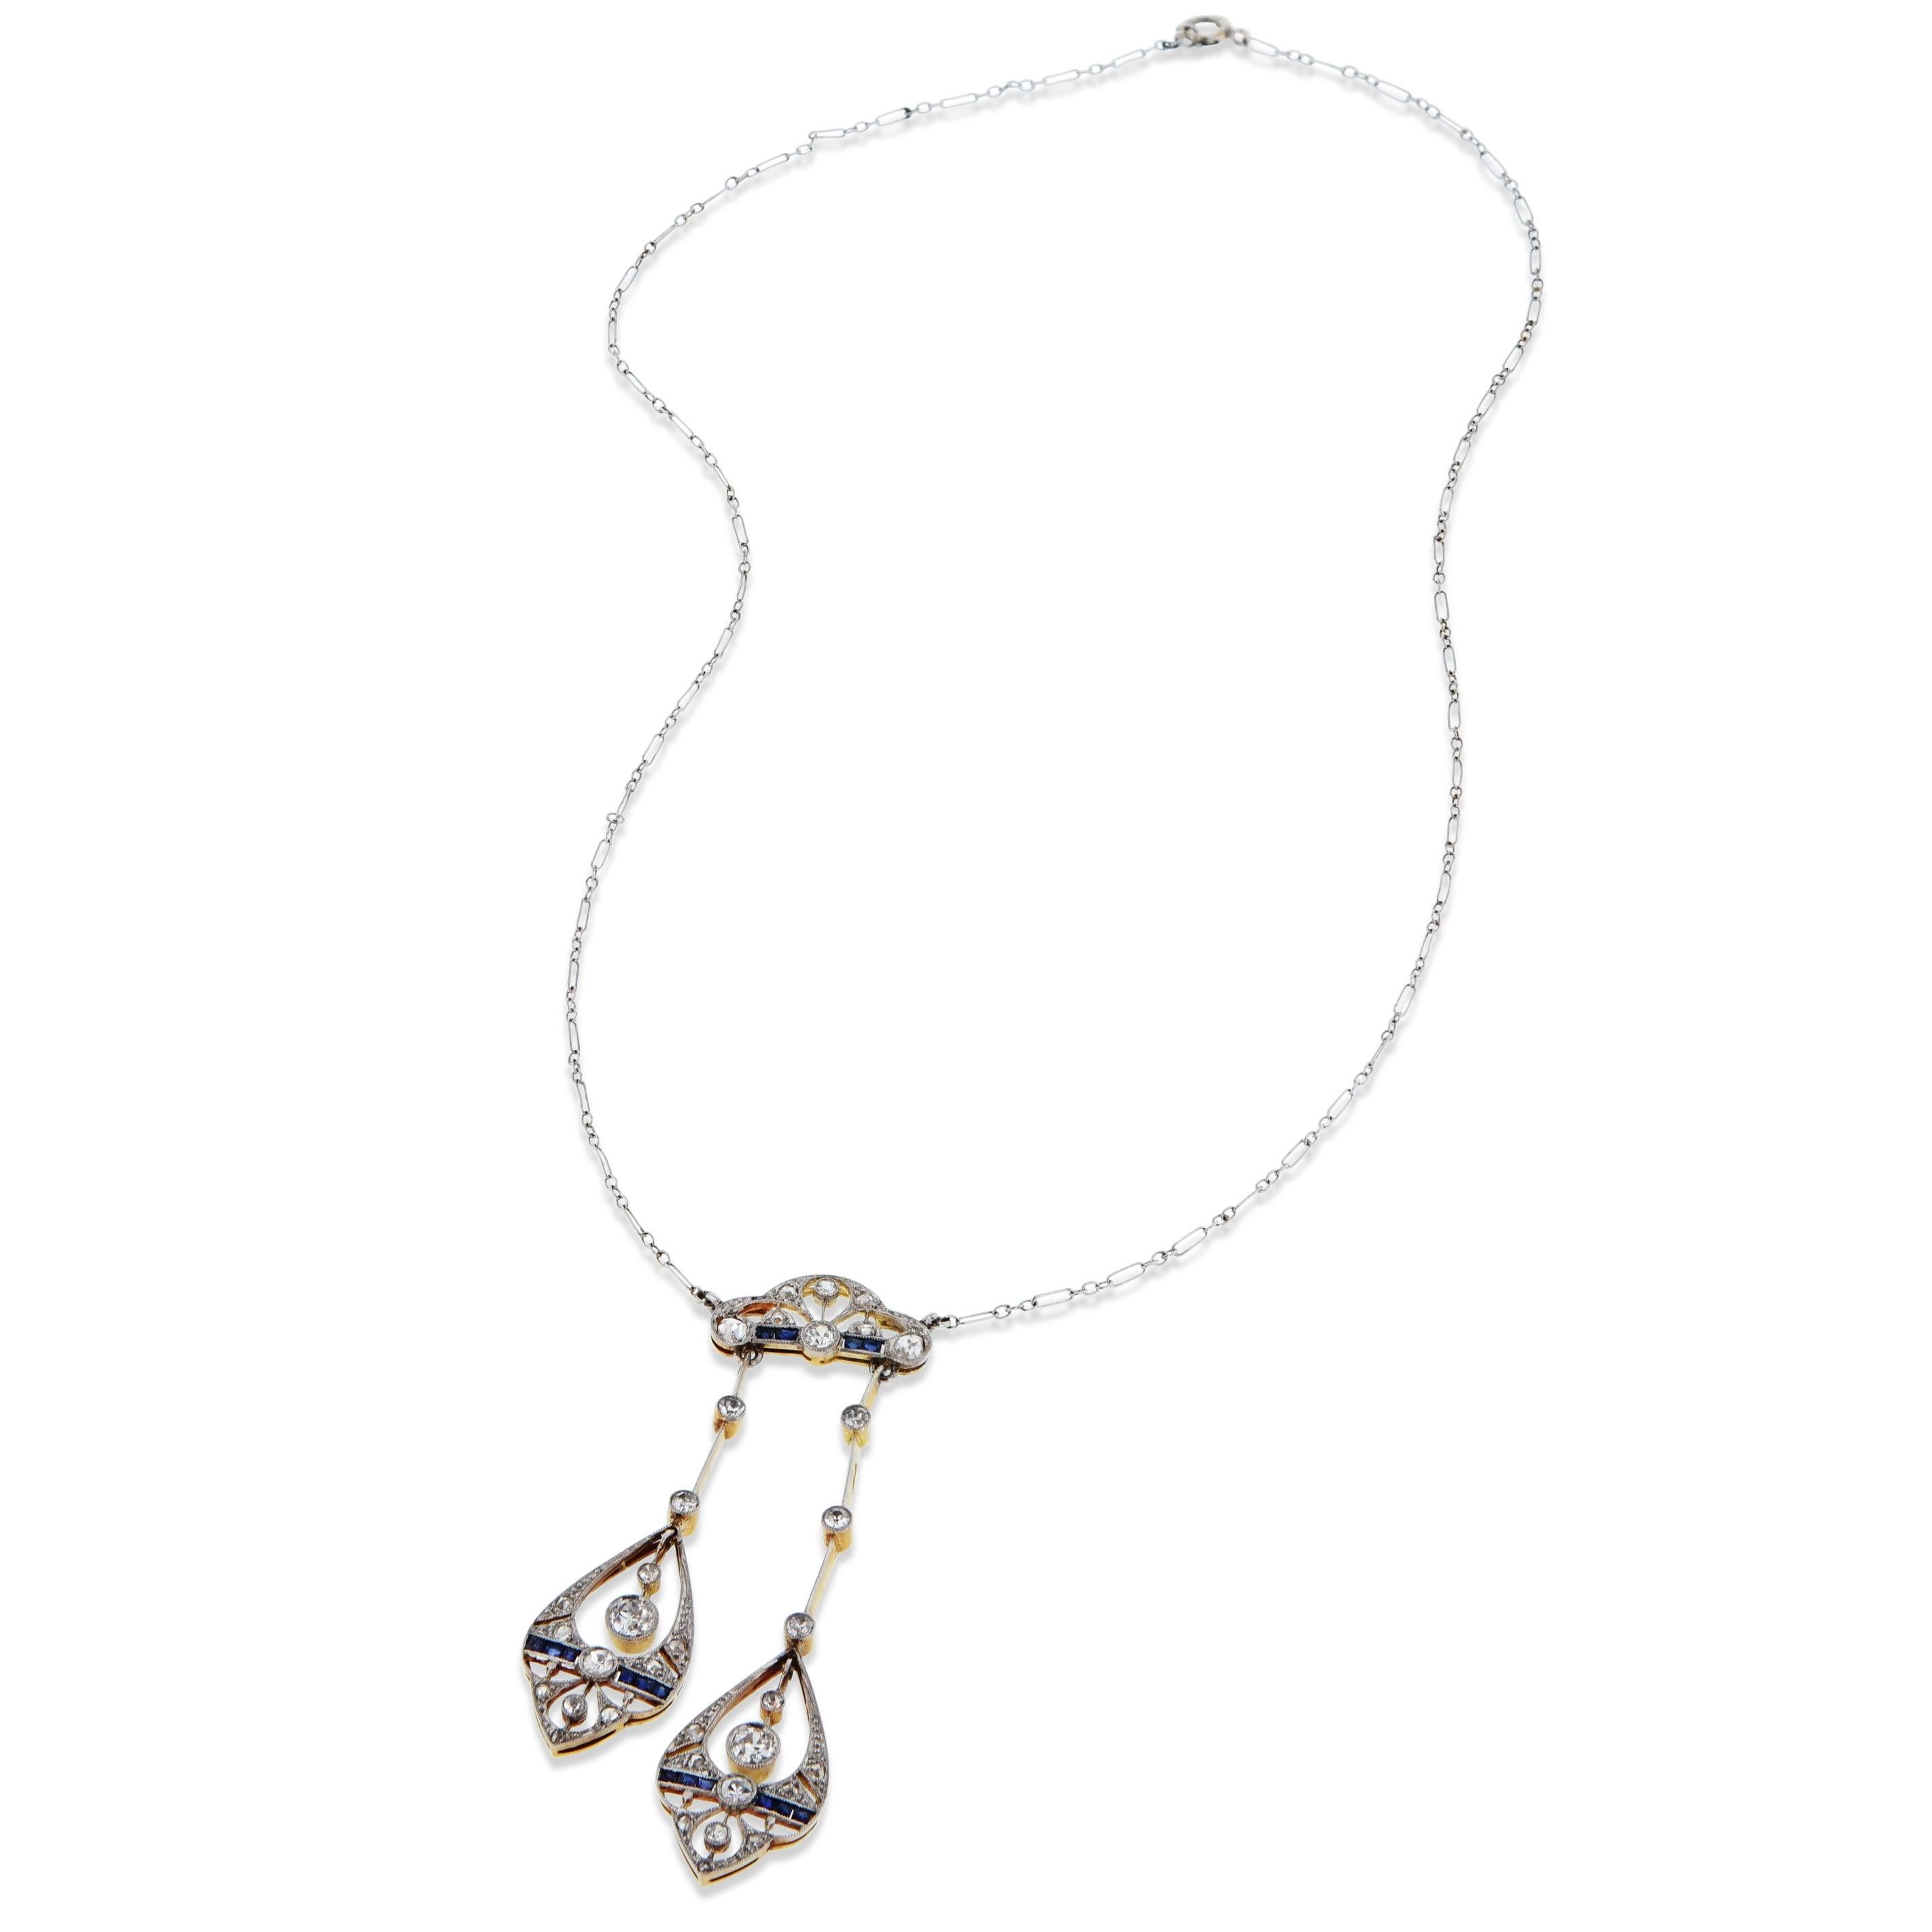 A dazzling display of Edwardian-inspired elegance, this breathtaking necklace features 35 diamonds - Rose Cut, Single Cut, and spectacular Old European Cut stones - set in platinum and backed by 18kt yellow gold. Expertly crafted, it's the ultimate